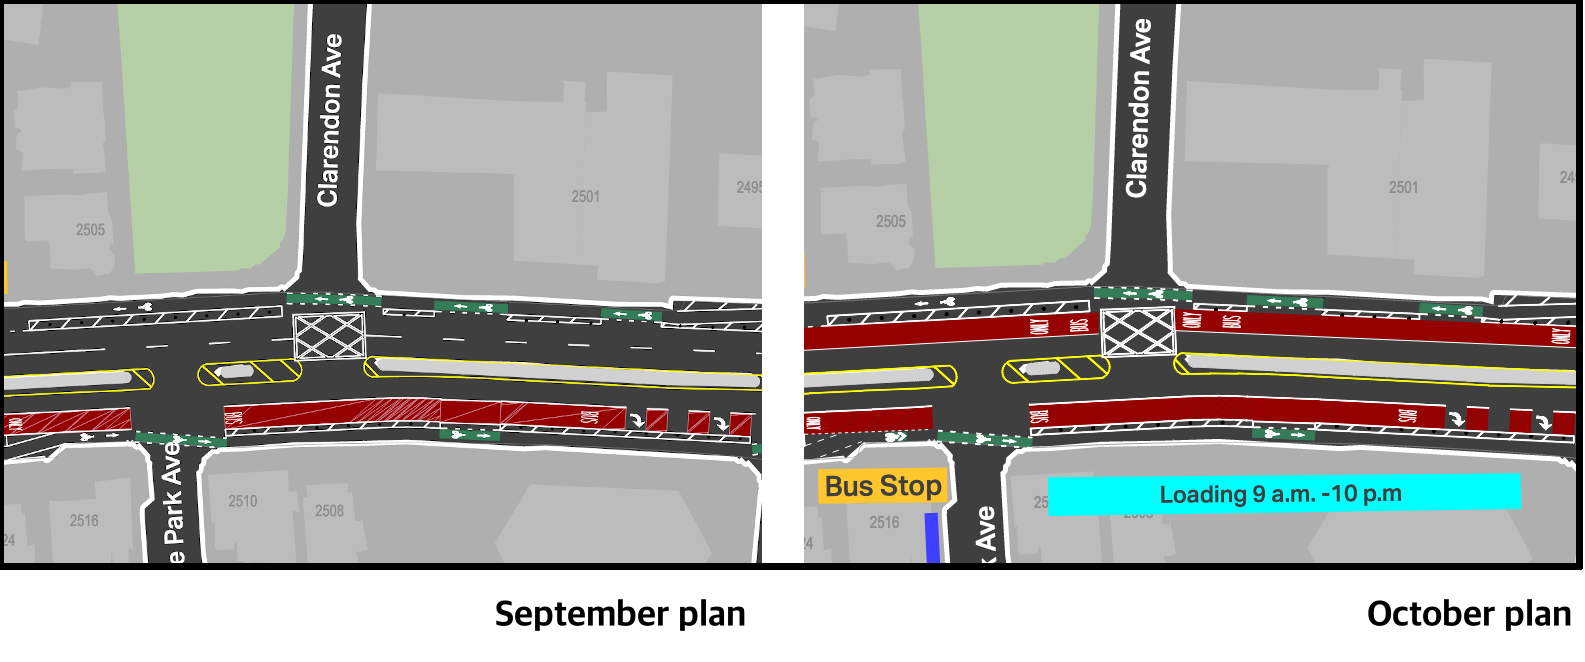 Plans for the reconfiguration of outer Massachusetts Avneue in Cambridge. The City of Cambridge has updated its plans for outer Massachusetts Avenue, near the Arlington town line, to add a second outbound dedicated bus lane, in addition to protected bike lanes. An earlier version of the plan (at left) would have only provided one, inbound bus lane.